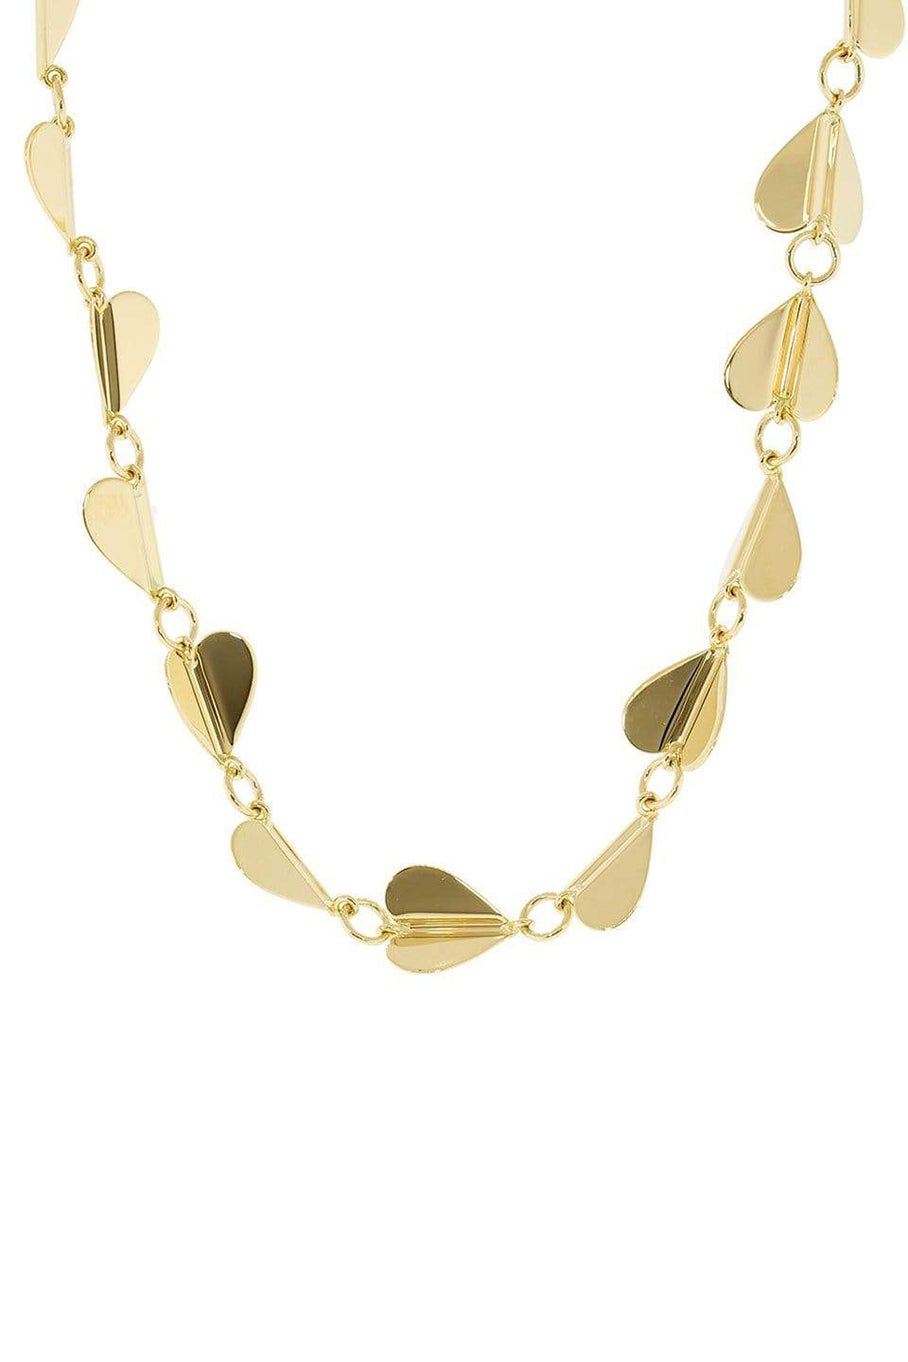 CADAR-Wings of Love Medium Necklace-YELLOW GOLD